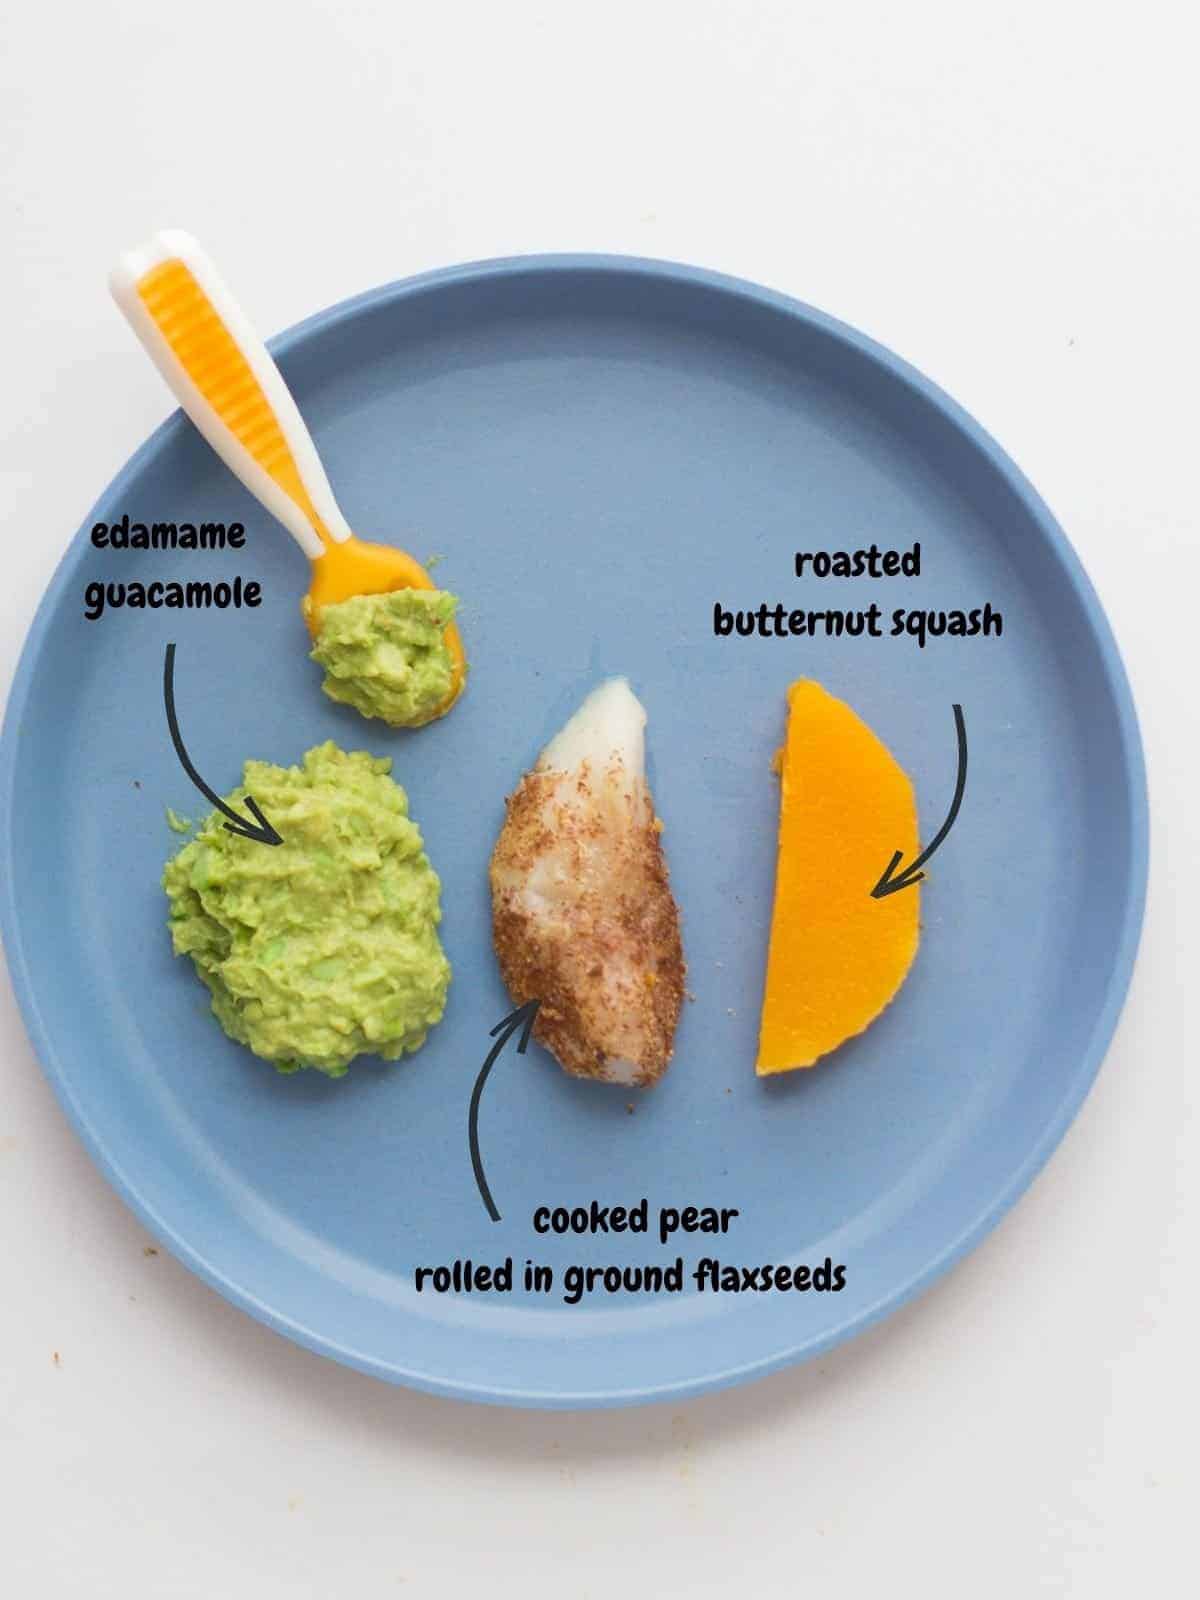 a baby's plate with a thick wedge of cooked pear rolled in flaxseeds, roasted butternut squash, and edamame guacamole.